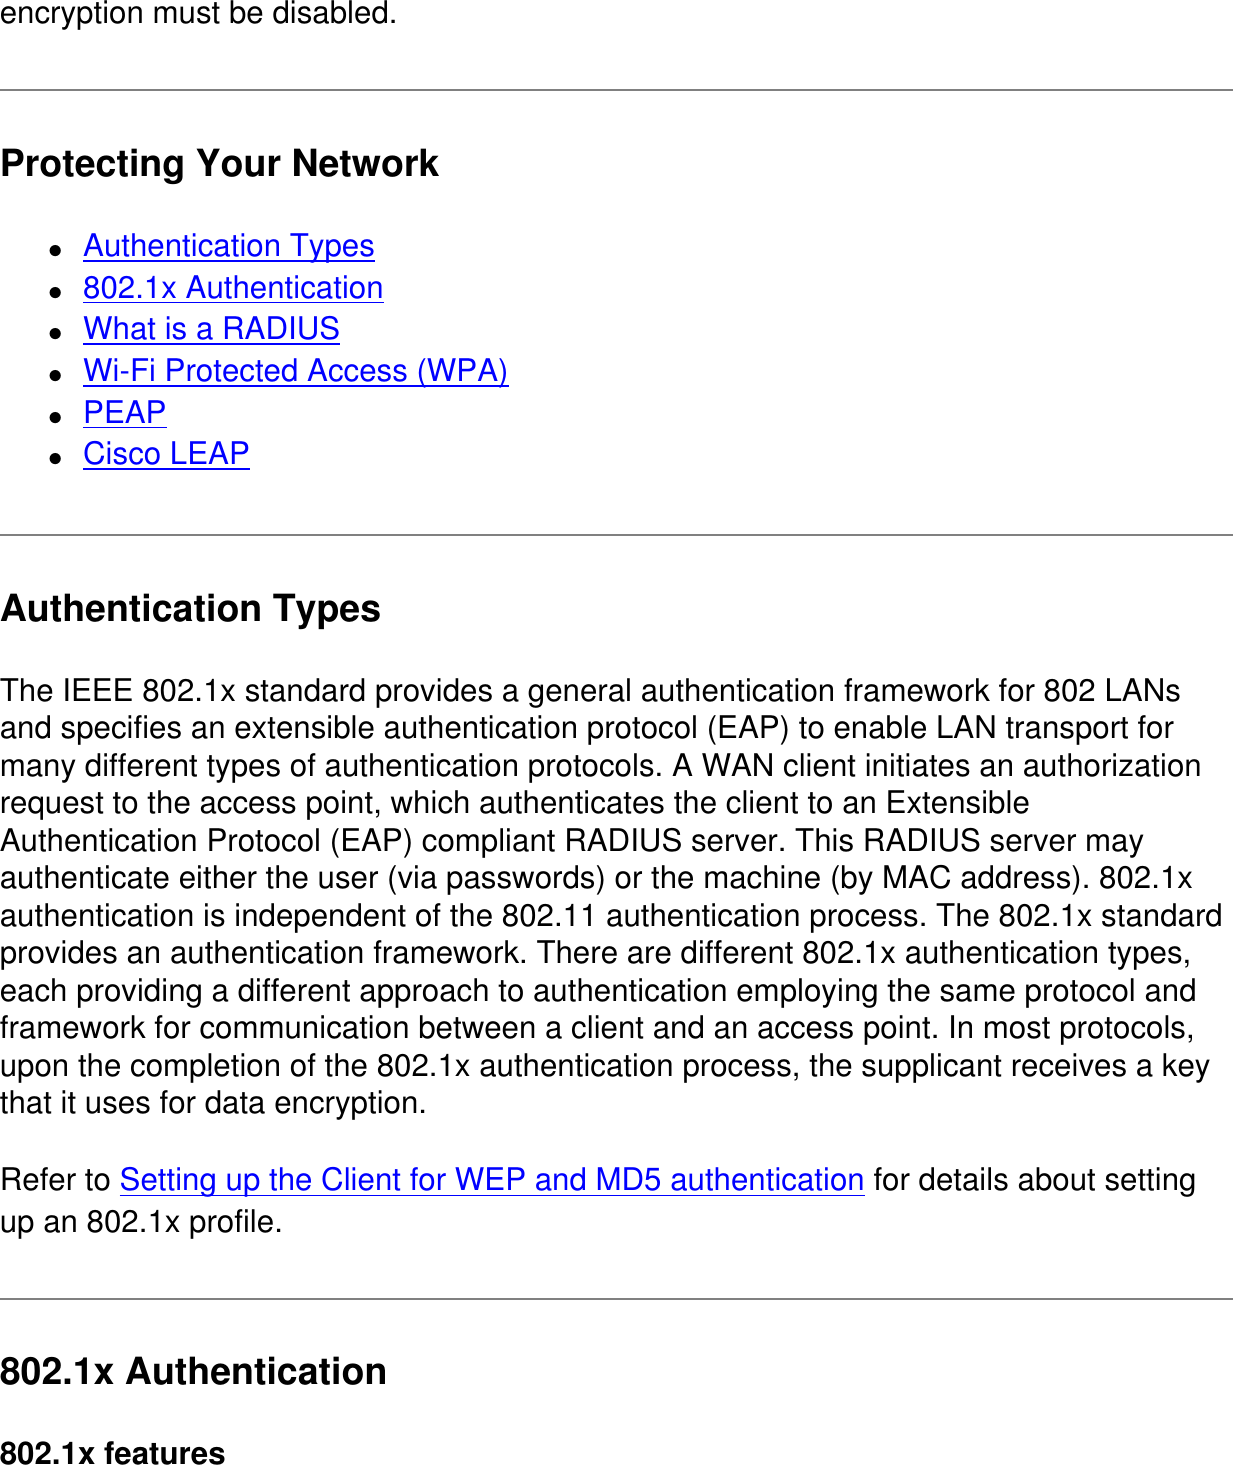 encryption must be disabled.Protecting Your Network●     Authentication Types●     802.1x Authentication●     What is a RADIUS●     Wi-Fi Protected Access (WPA)●     PEAP●     Cisco LEAPAuthentication TypesThe IEEE 802.1x standard provides a general authentication framework for 802 LANs and specifies an extensible authentication protocol (EAP) to enable LAN transport for many different types of authentication protocols. A WAN client initiates an authorization request to the access point, which authenticates the client to an Extensible Authentication Protocol (EAP) compliant RADIUS server. This RADIUS server may authenticate either the user (via passwords) or the machine (by MAC address). 802.1x authentication is independent of the 802.11 authentication process. The 802.1x standard provides an authentication framework. There are different 802.1x authentication types, each providing a different approach to authentication employing the same protocol and framework for communication between a client and an access point. In most protocols, upon the completion of the 802.1x authentication process, the supplicant receives a key that it uses for data encryption. Refer to Setting up the Client for WEP and MD5 authentication for details about setting up an 802.1x profile.802.1x Authentication802.1x features